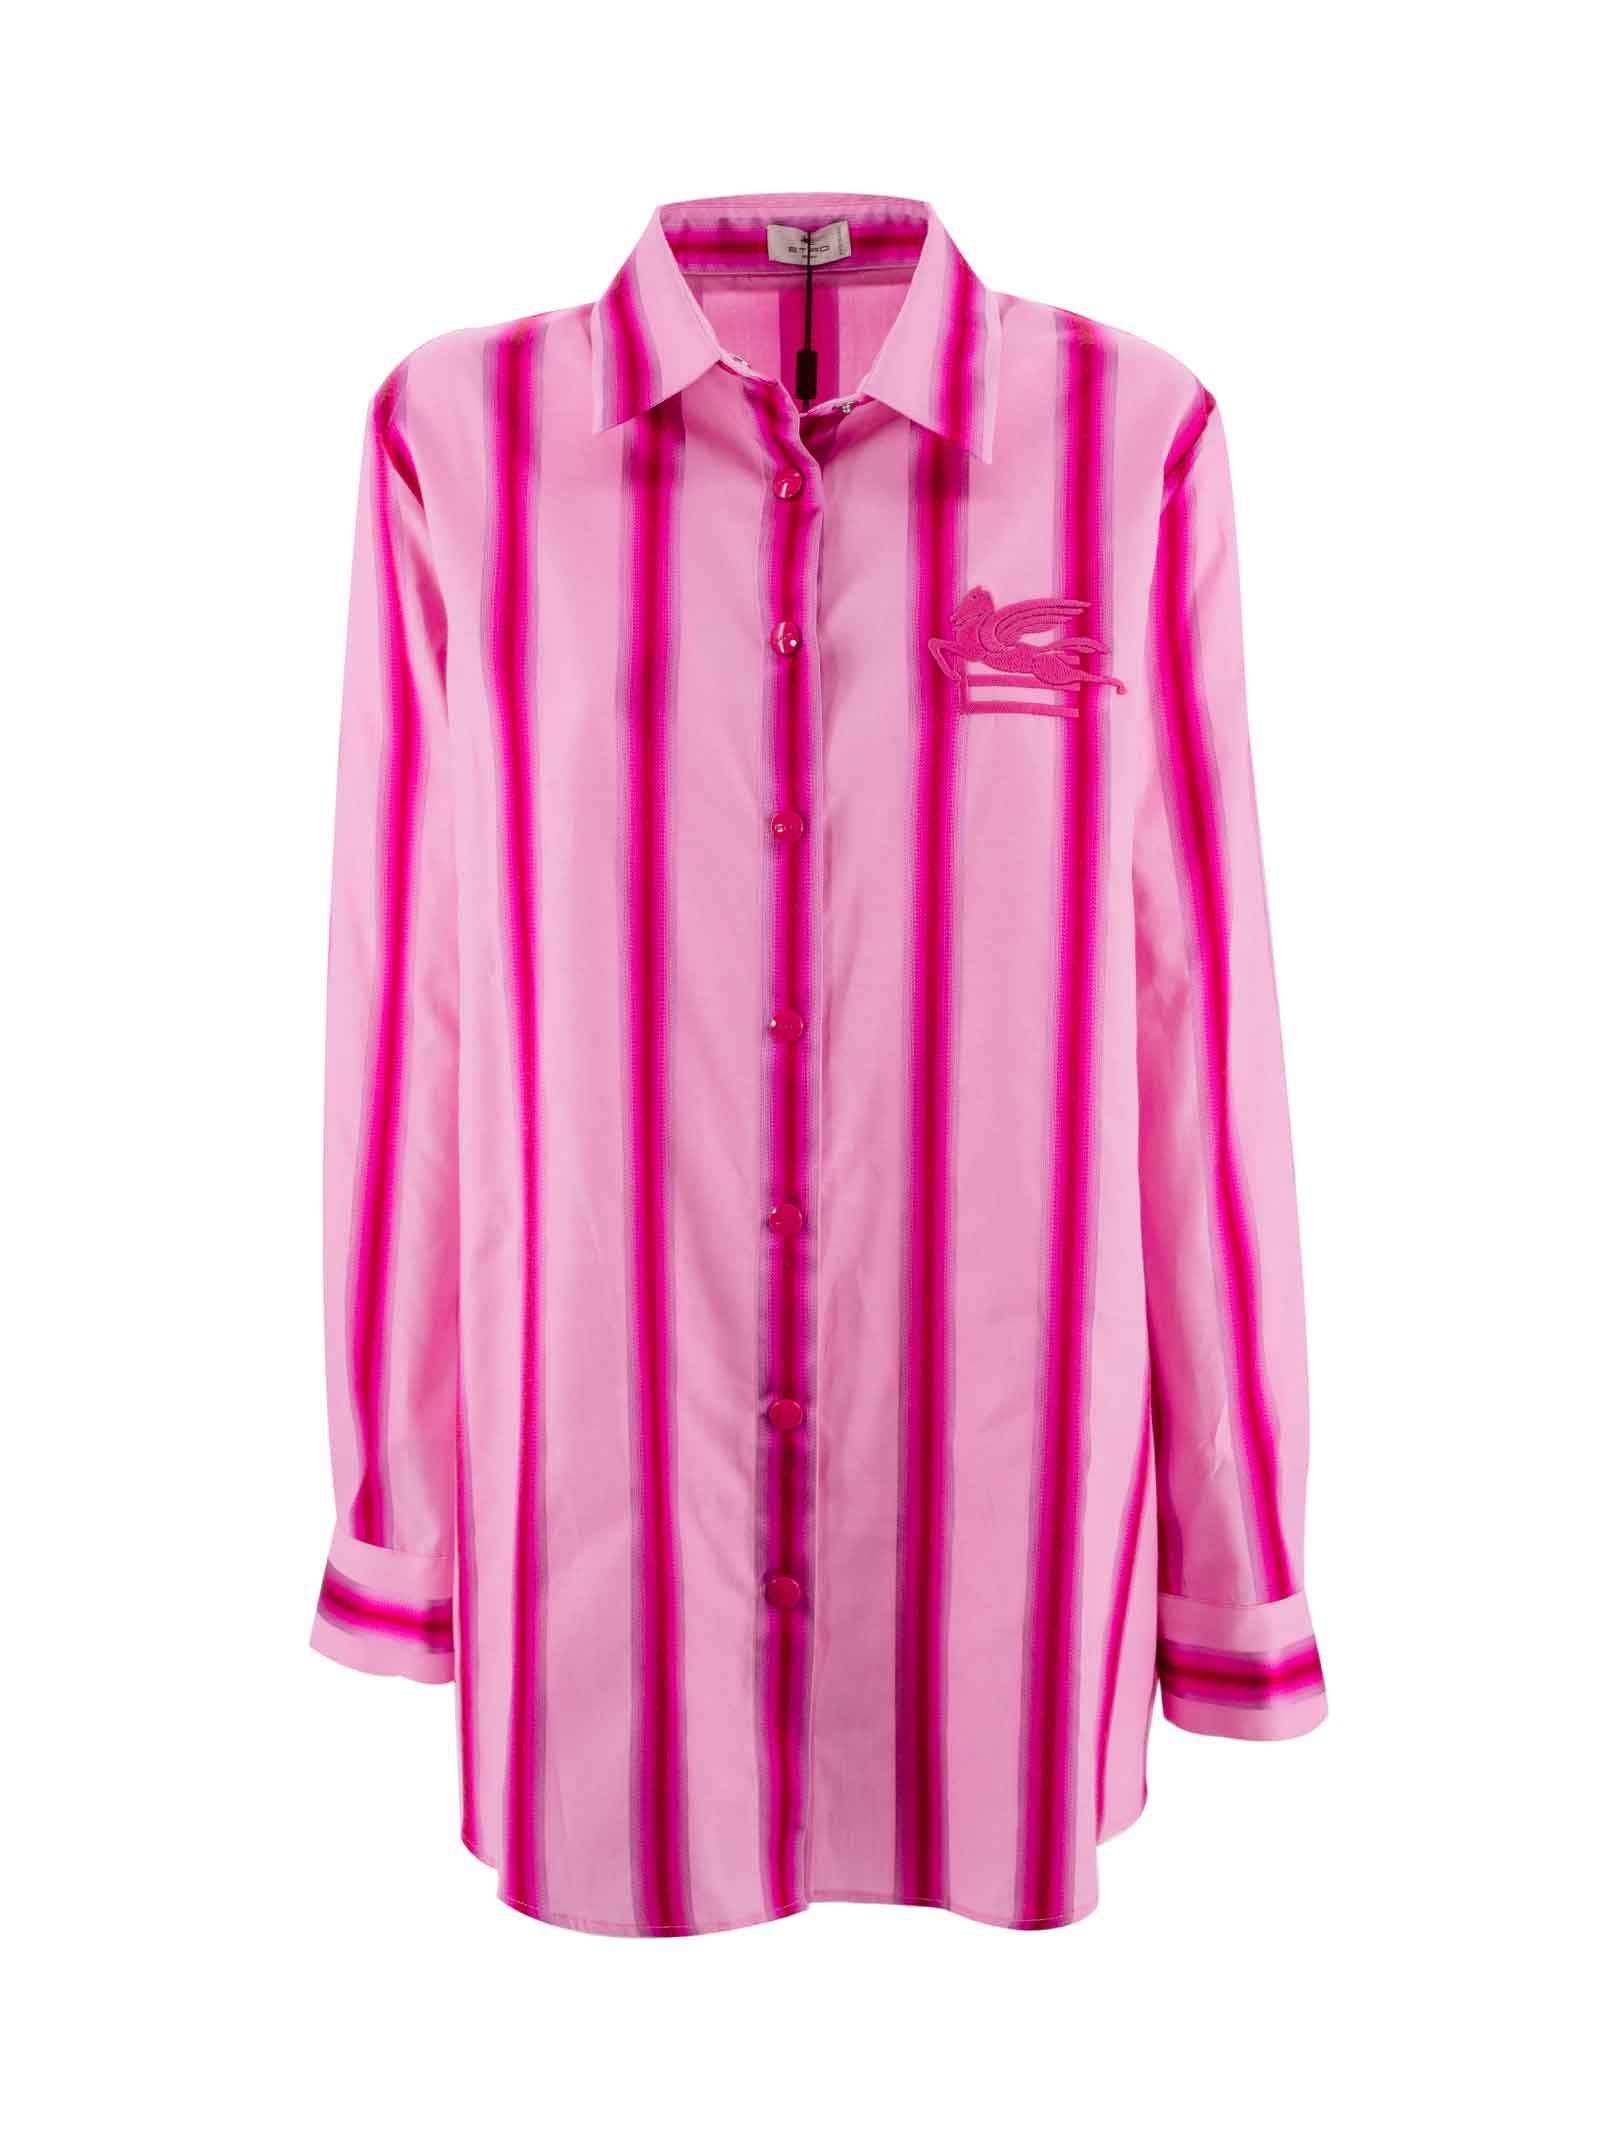 ETRO STRIPED SHIRT IN COTTON AND SILK WITH PEGASUS